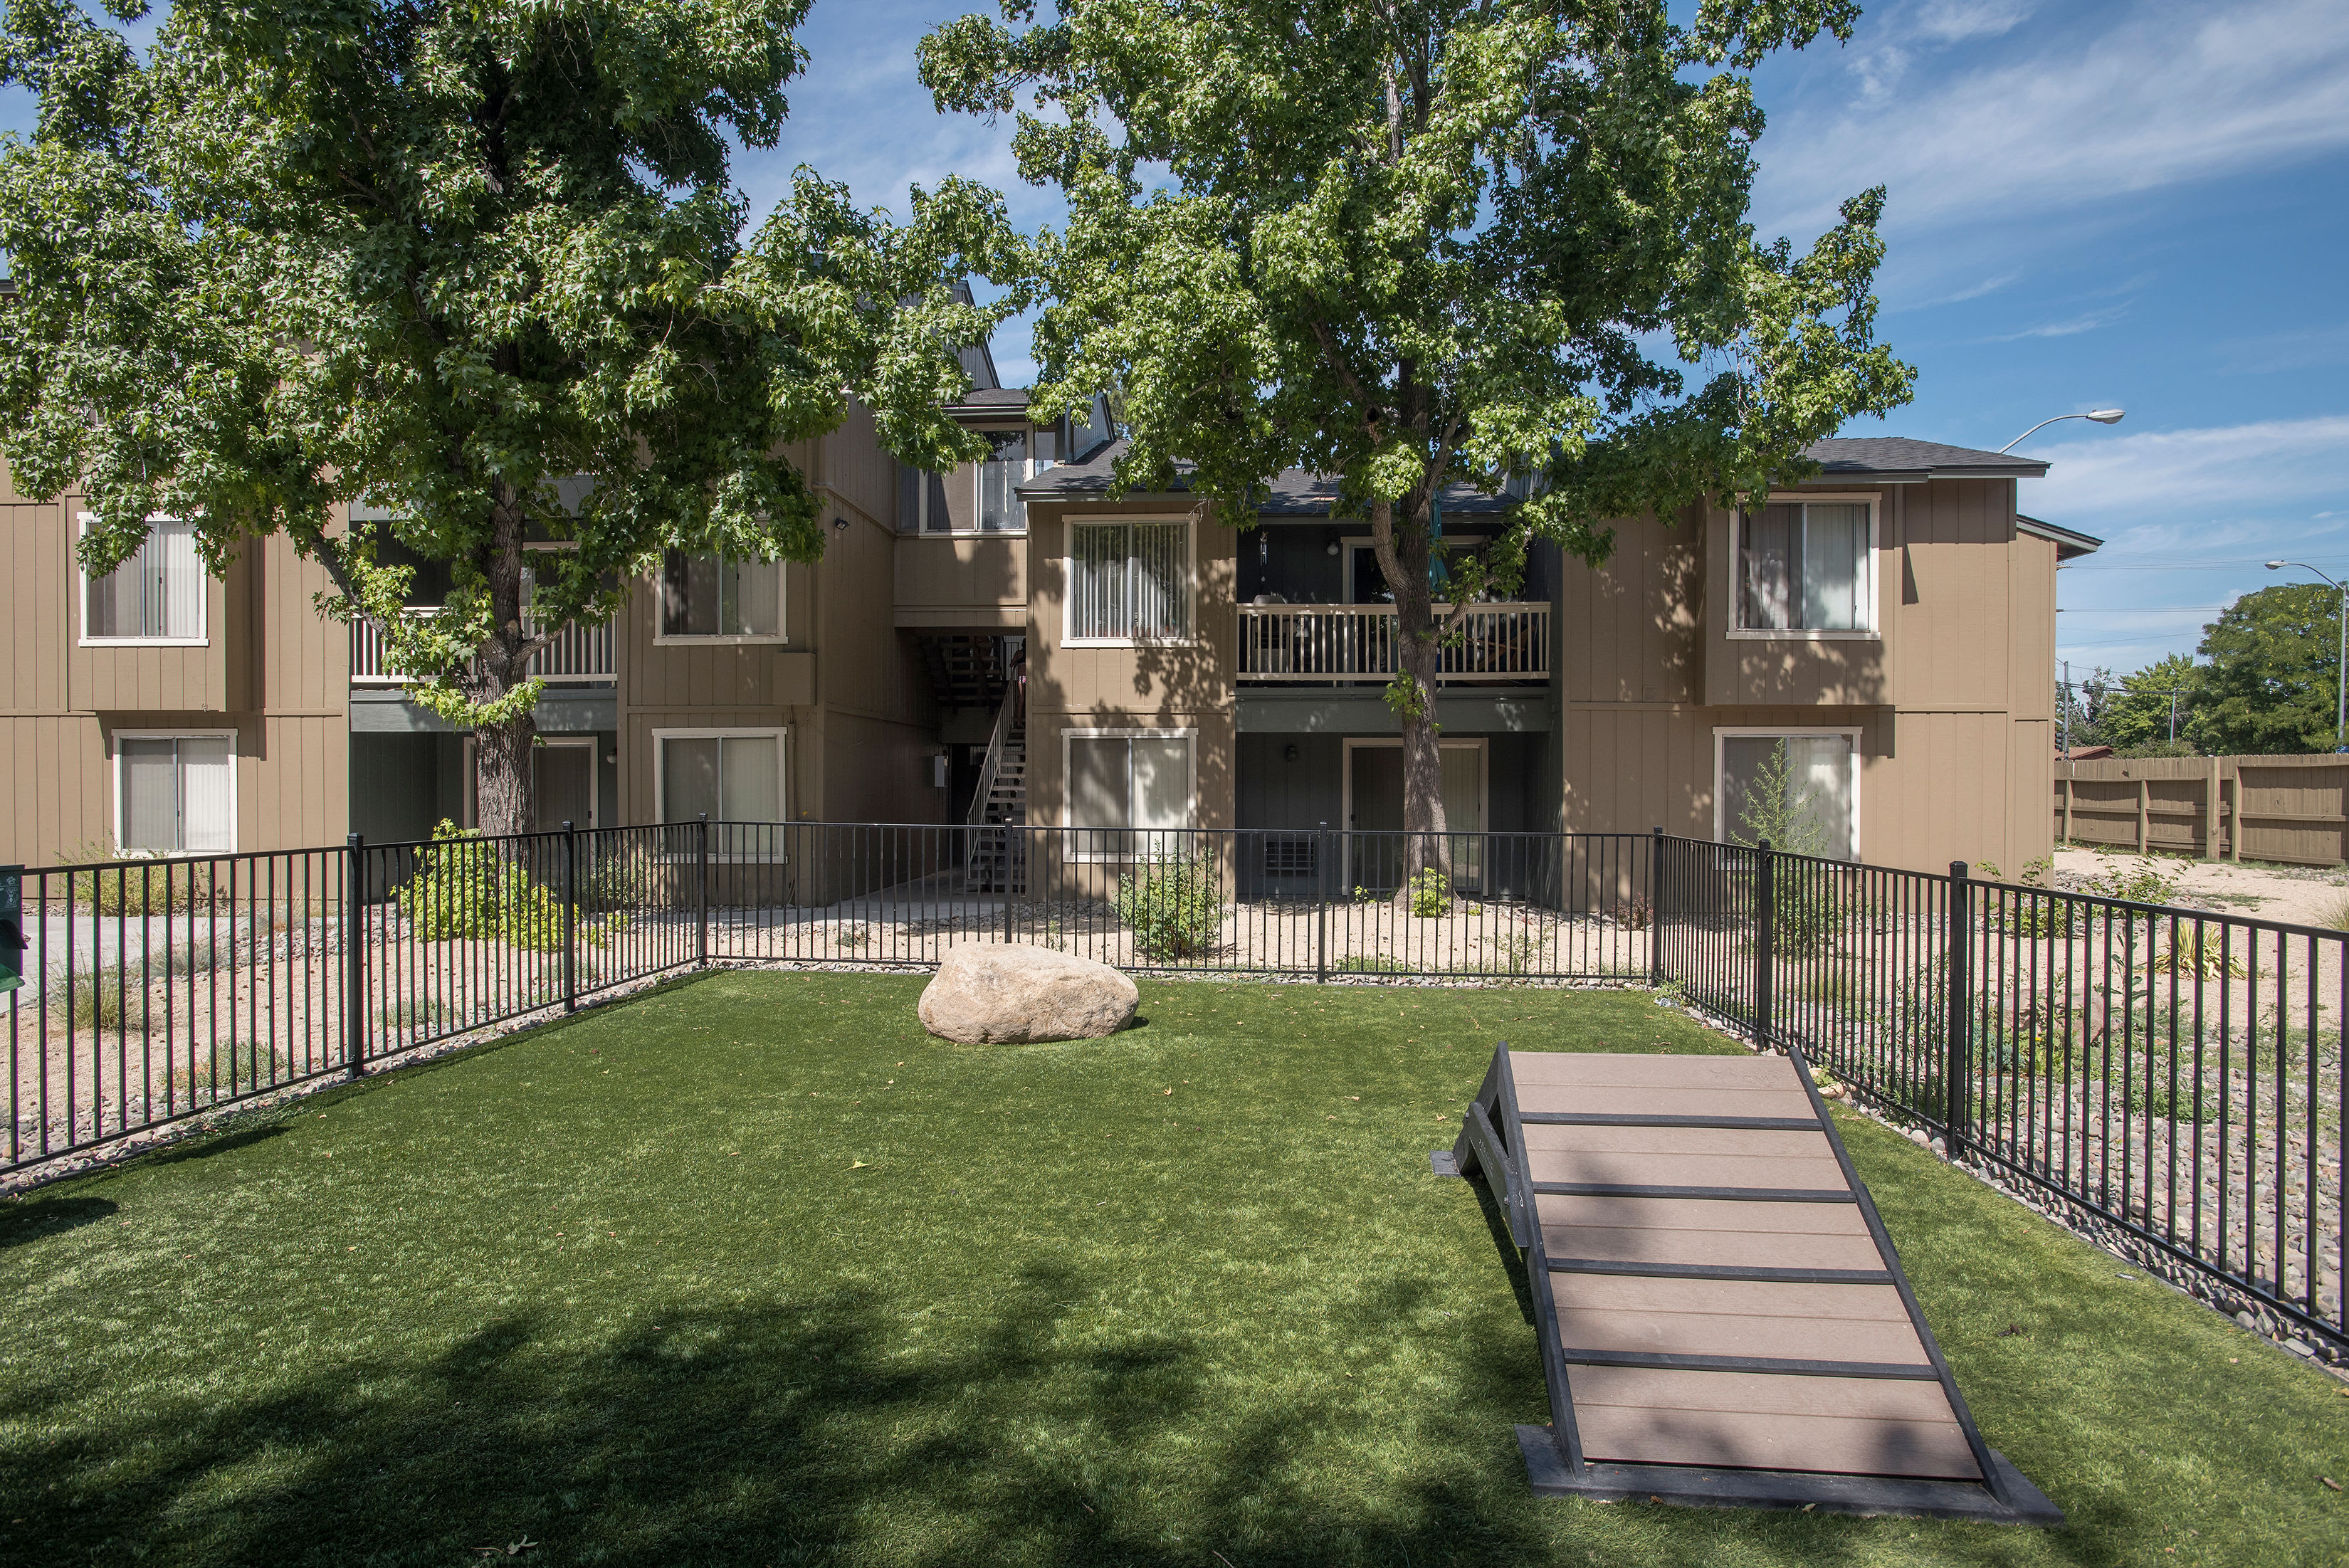 View amenities like our dog park at Keyway Apartments in Sparks, Nevada